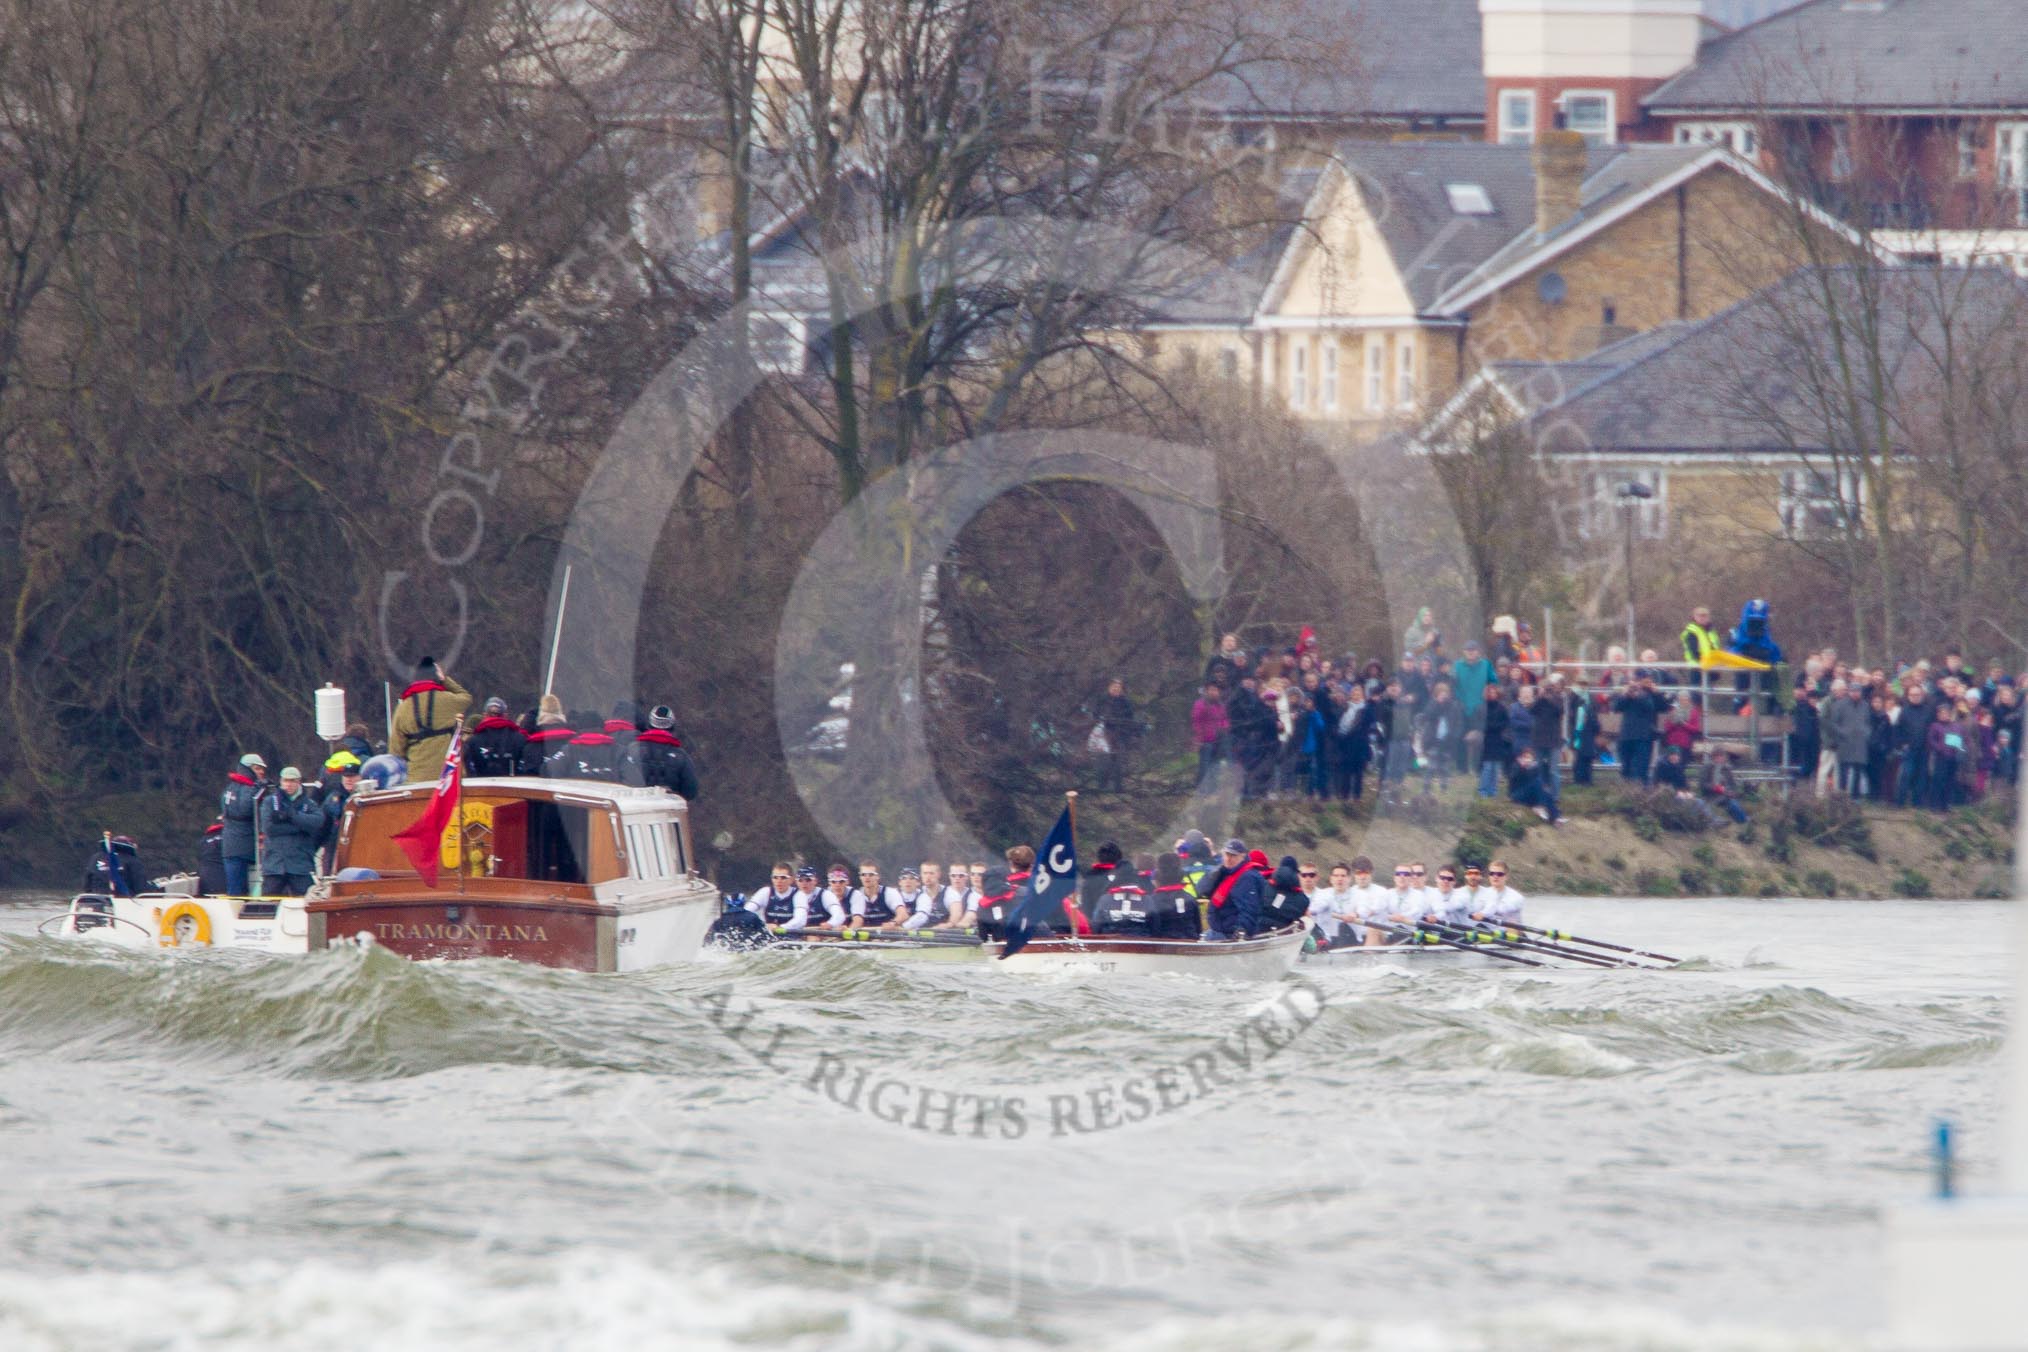 The Boat Race 2013.
Putney,
London SW15,

United Kingdom,
on 31 March 2013 at 16:33, image #323